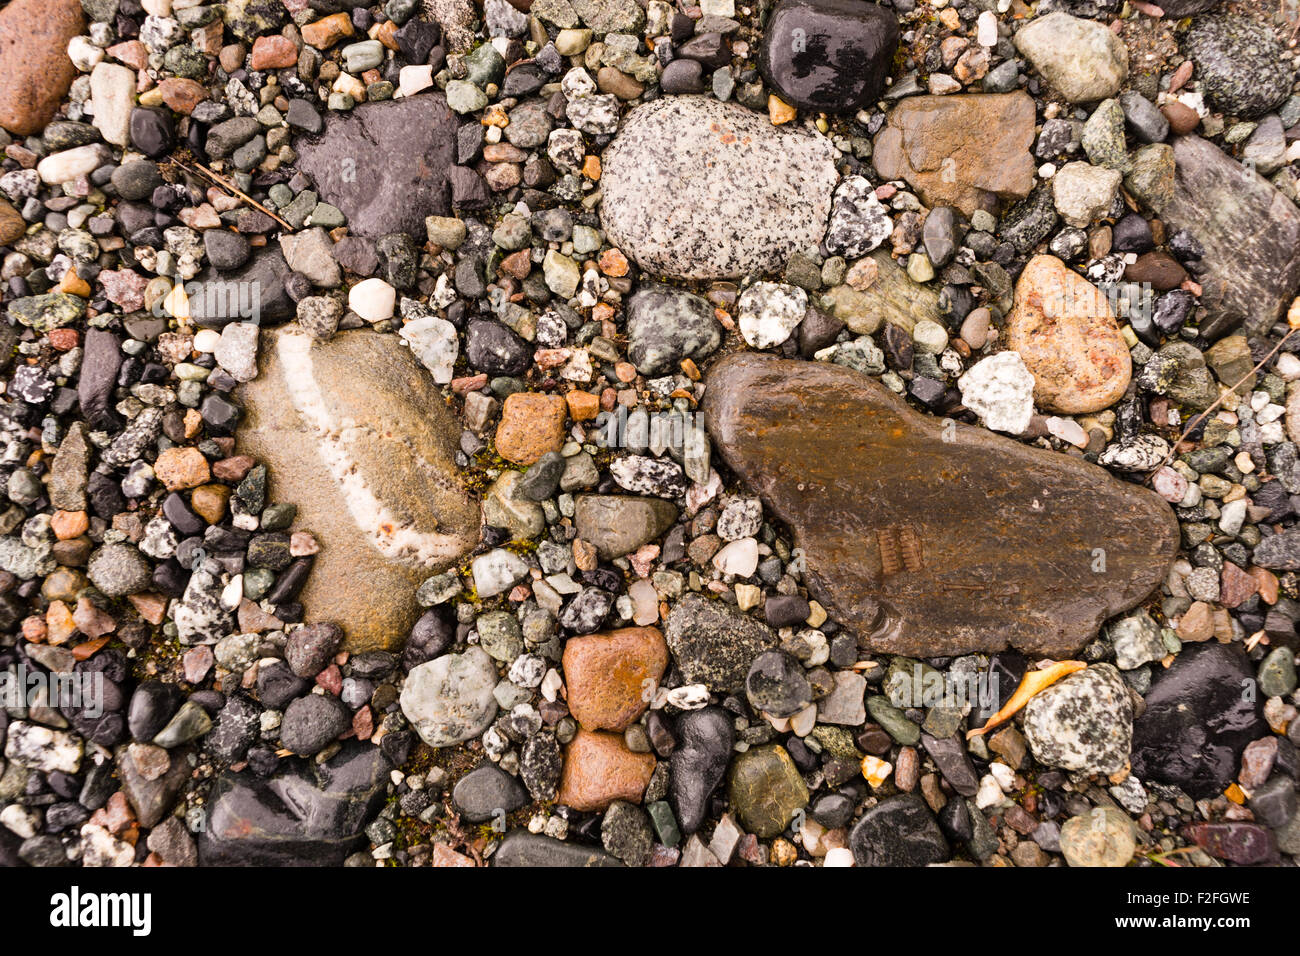 A wide variety of rocks make up the ground at river's edge in Alaska Stock Photo